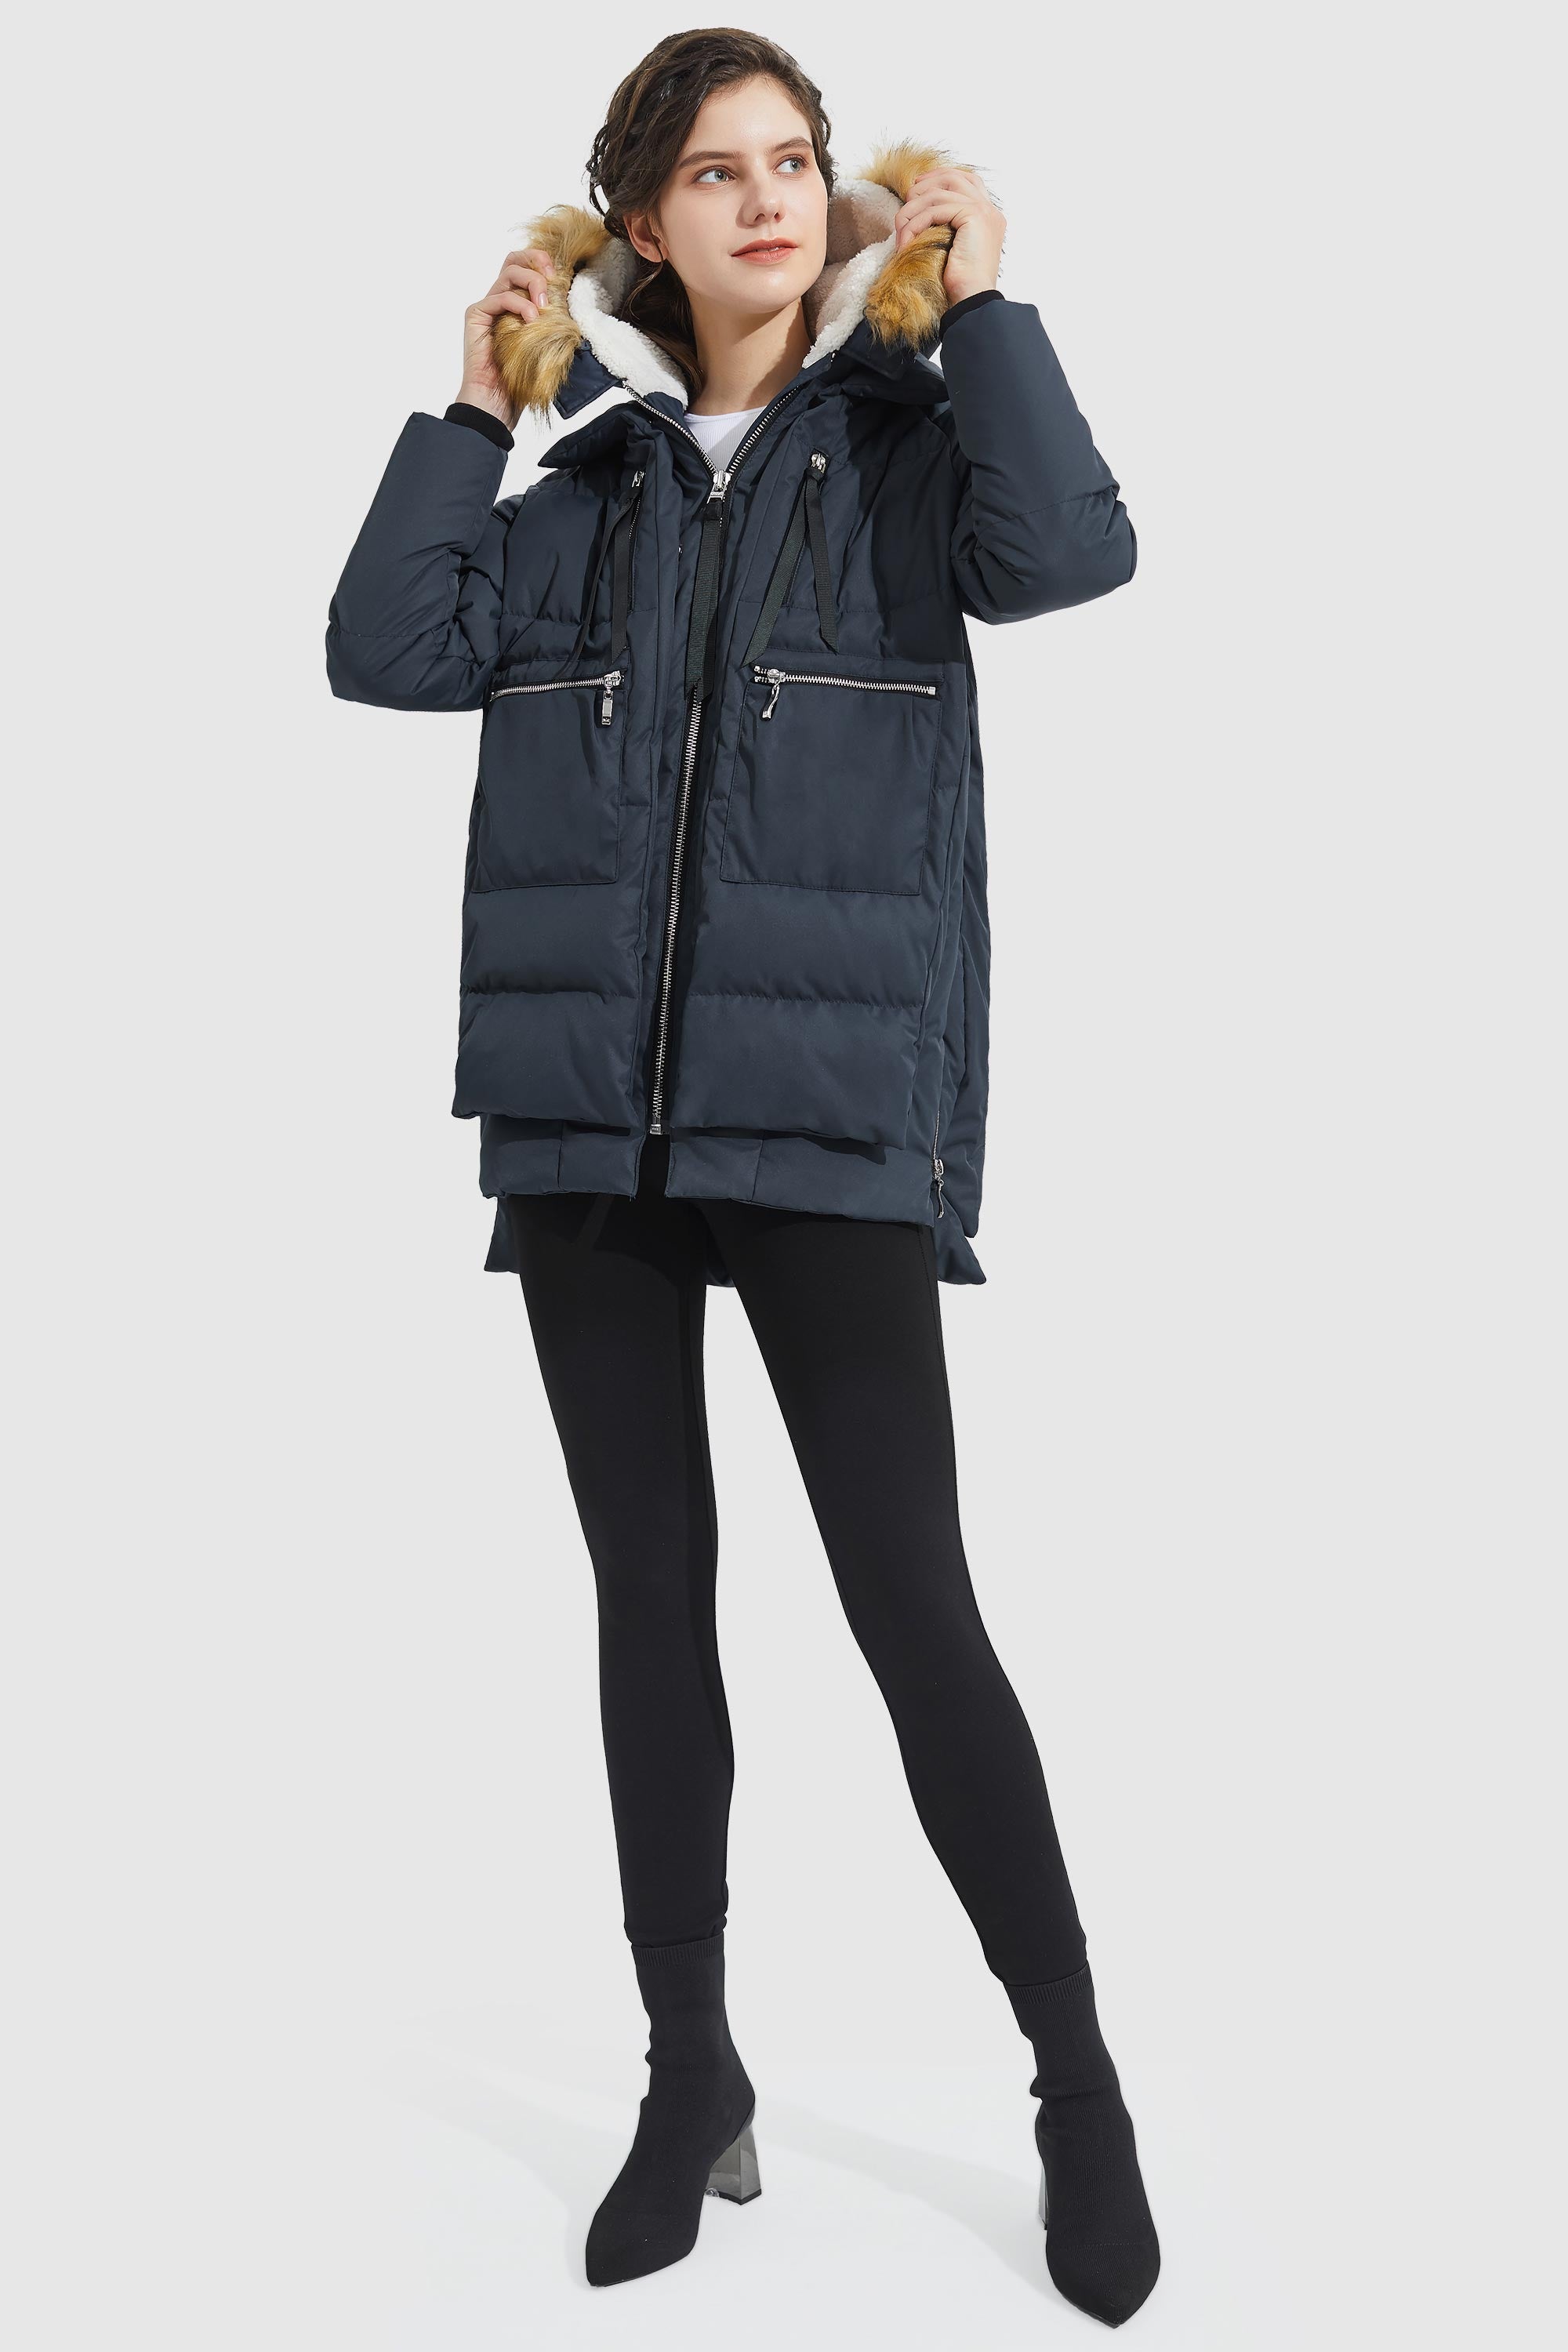 Zip front Thickened Down Jacket with Faux Fur Hood